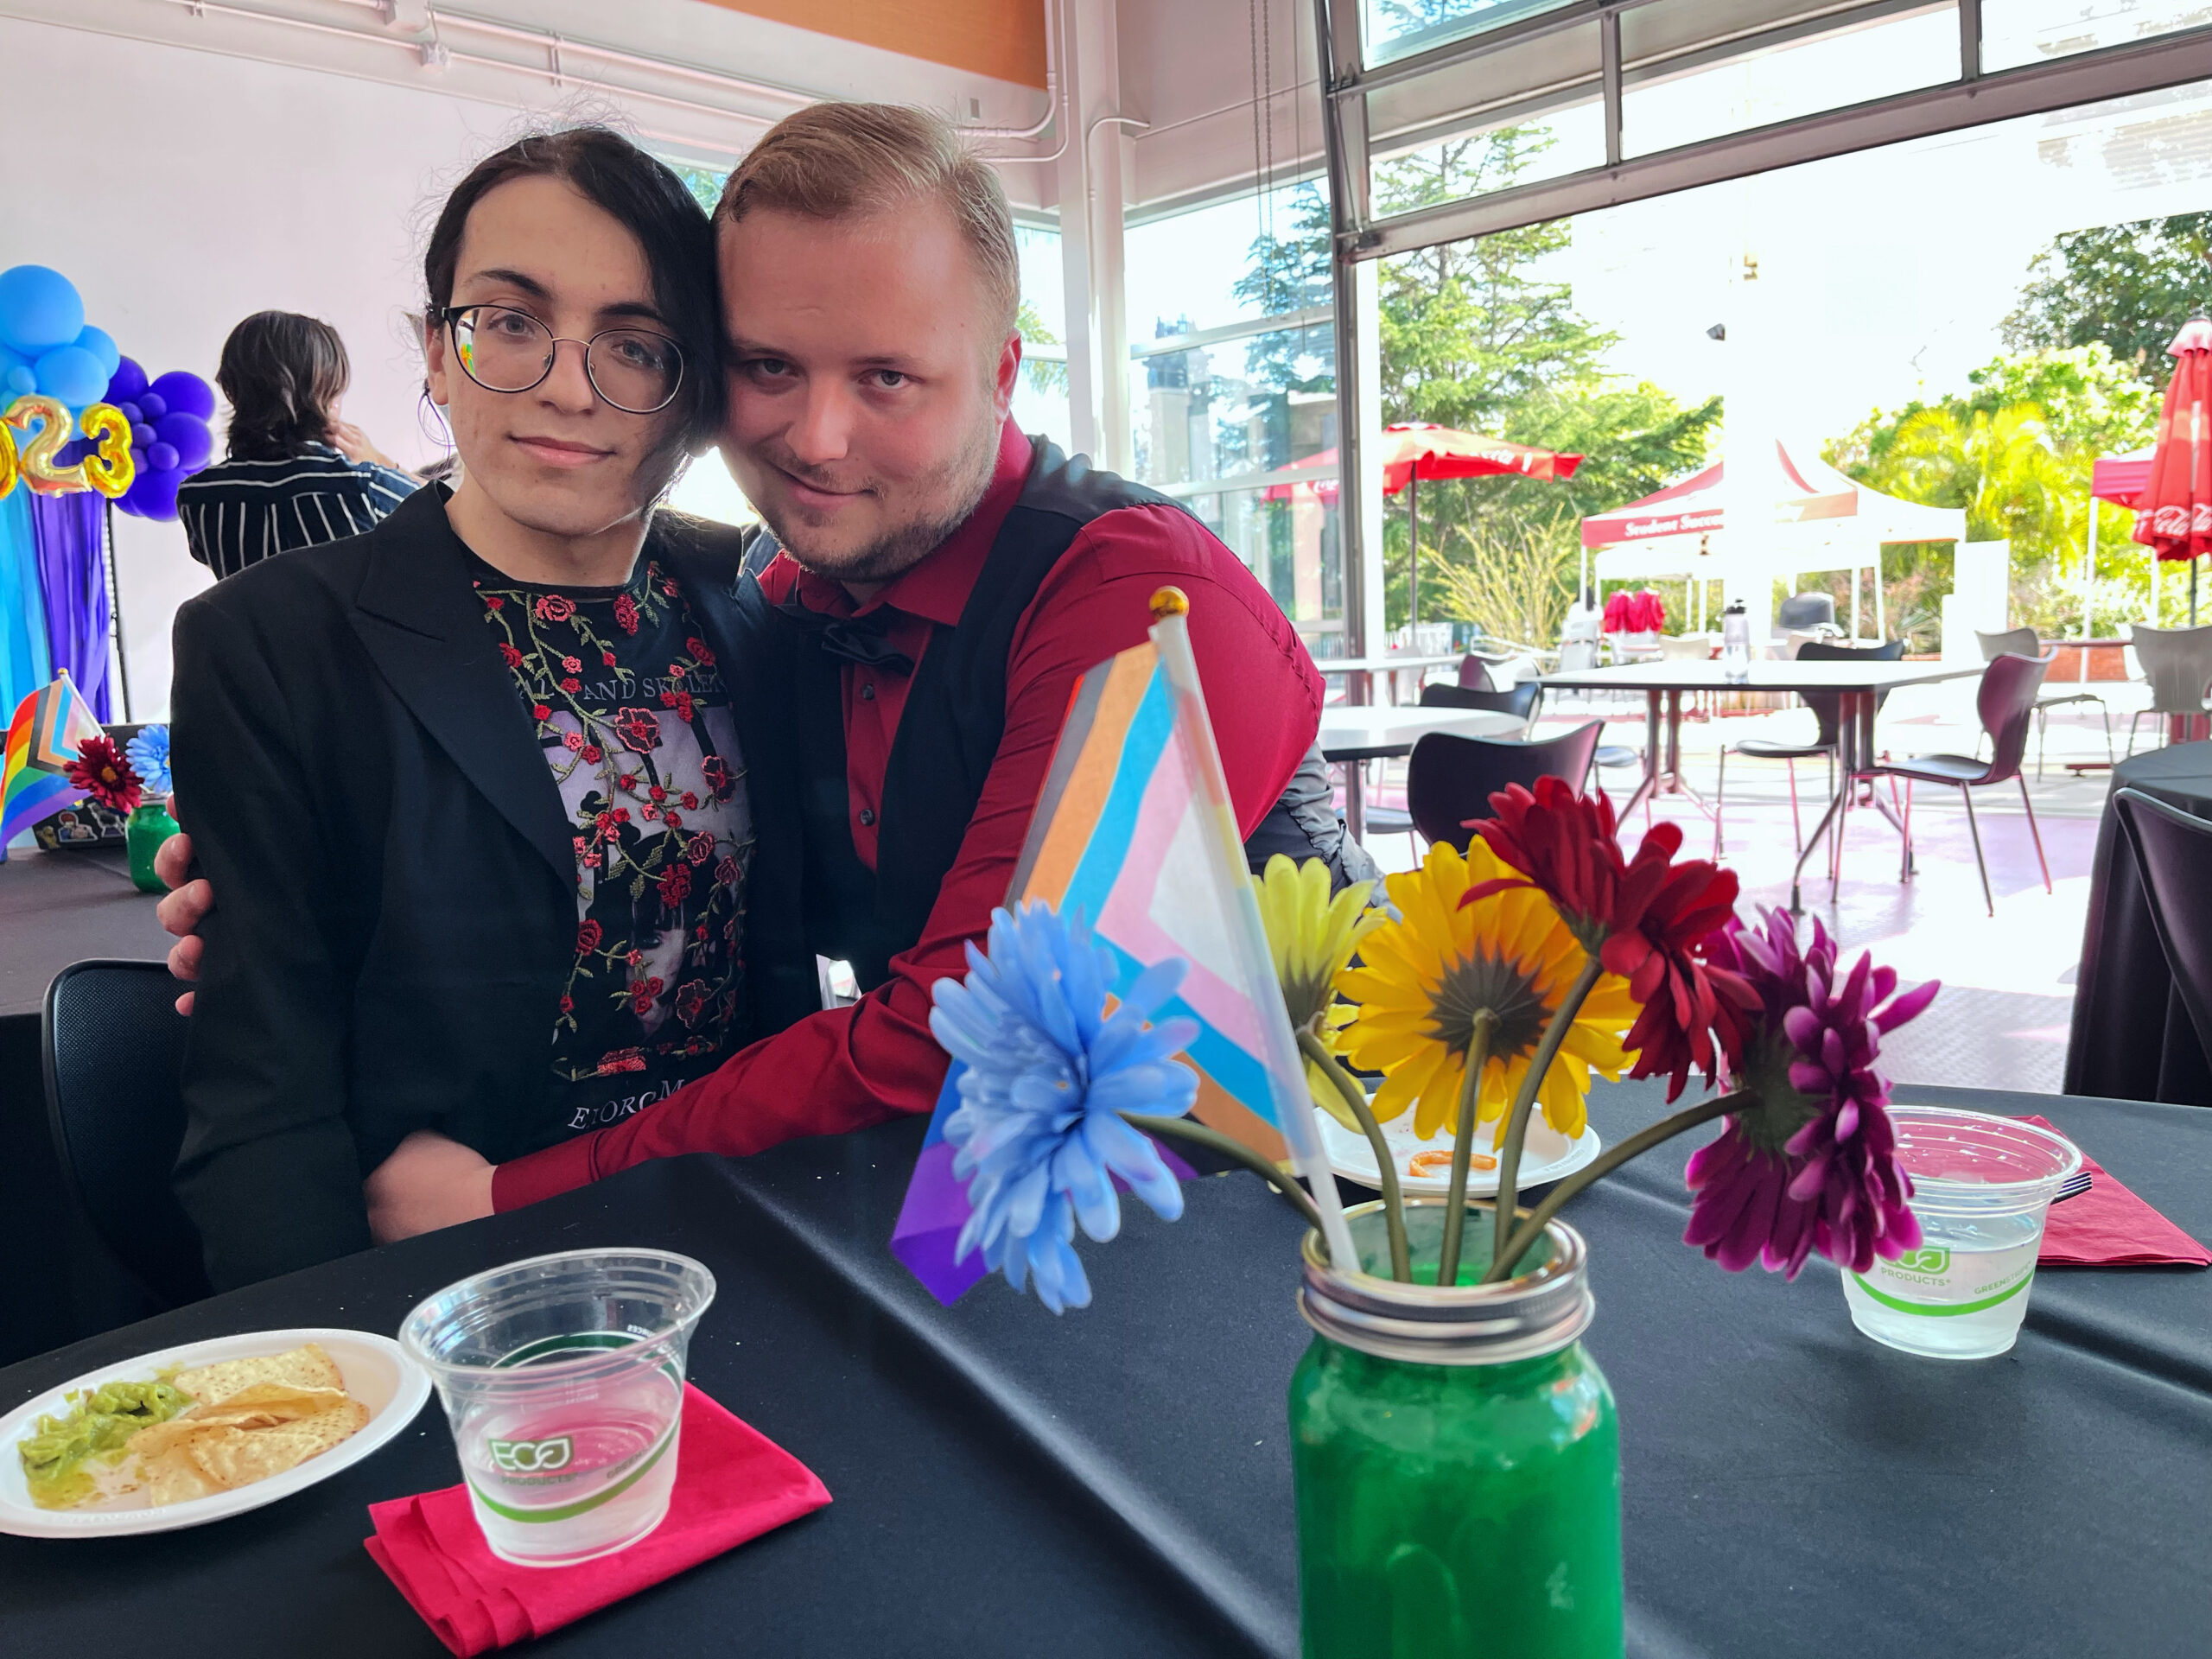 Brendan Kempka (left) and his boyfriend, Jacob Miller (right), sitting together at the queer prom.